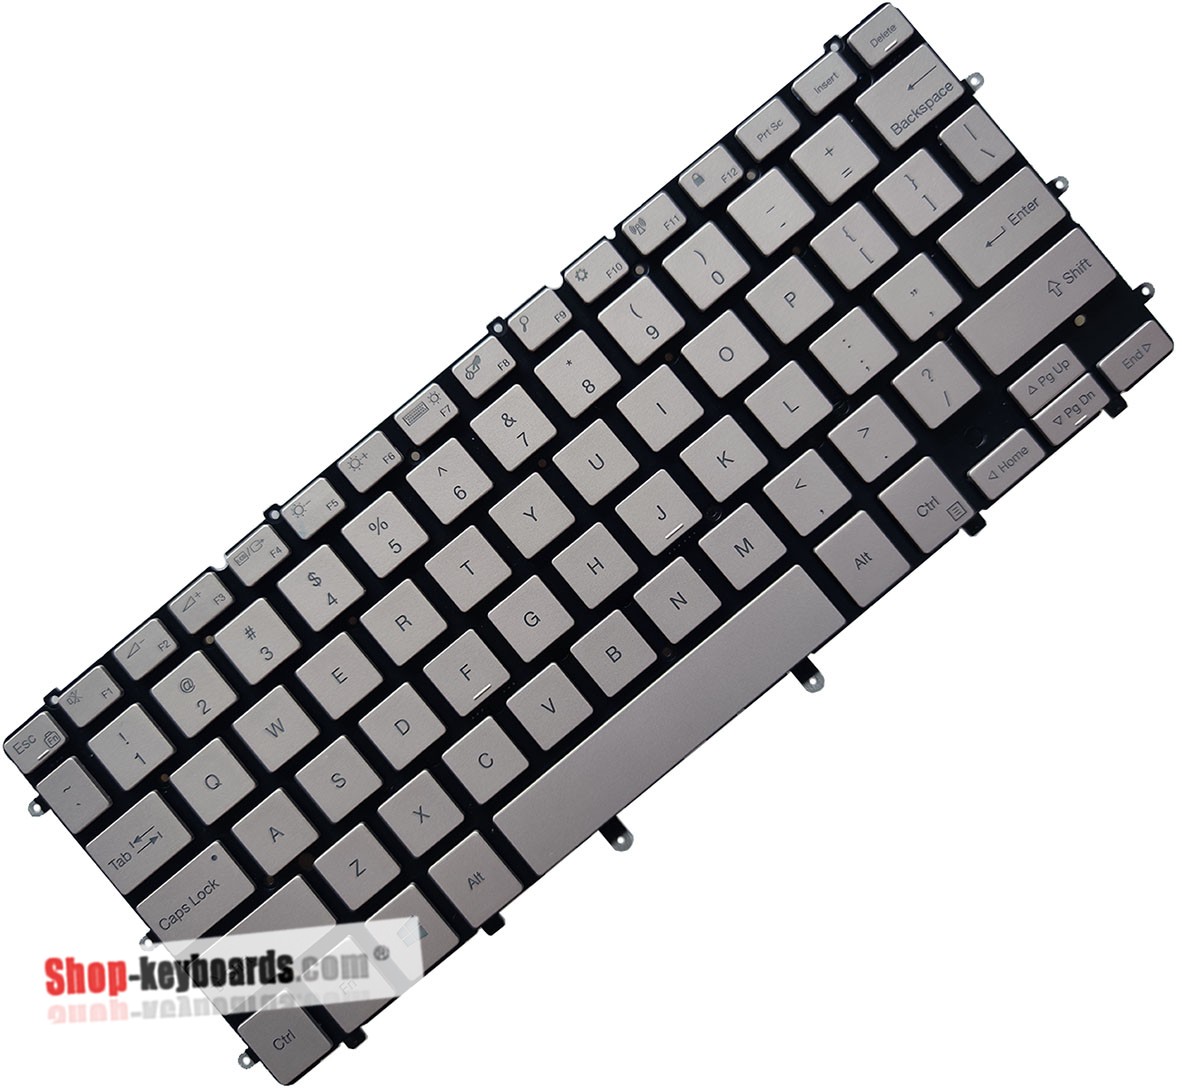 QUANTA AETX7X00020 Keyboard replacement